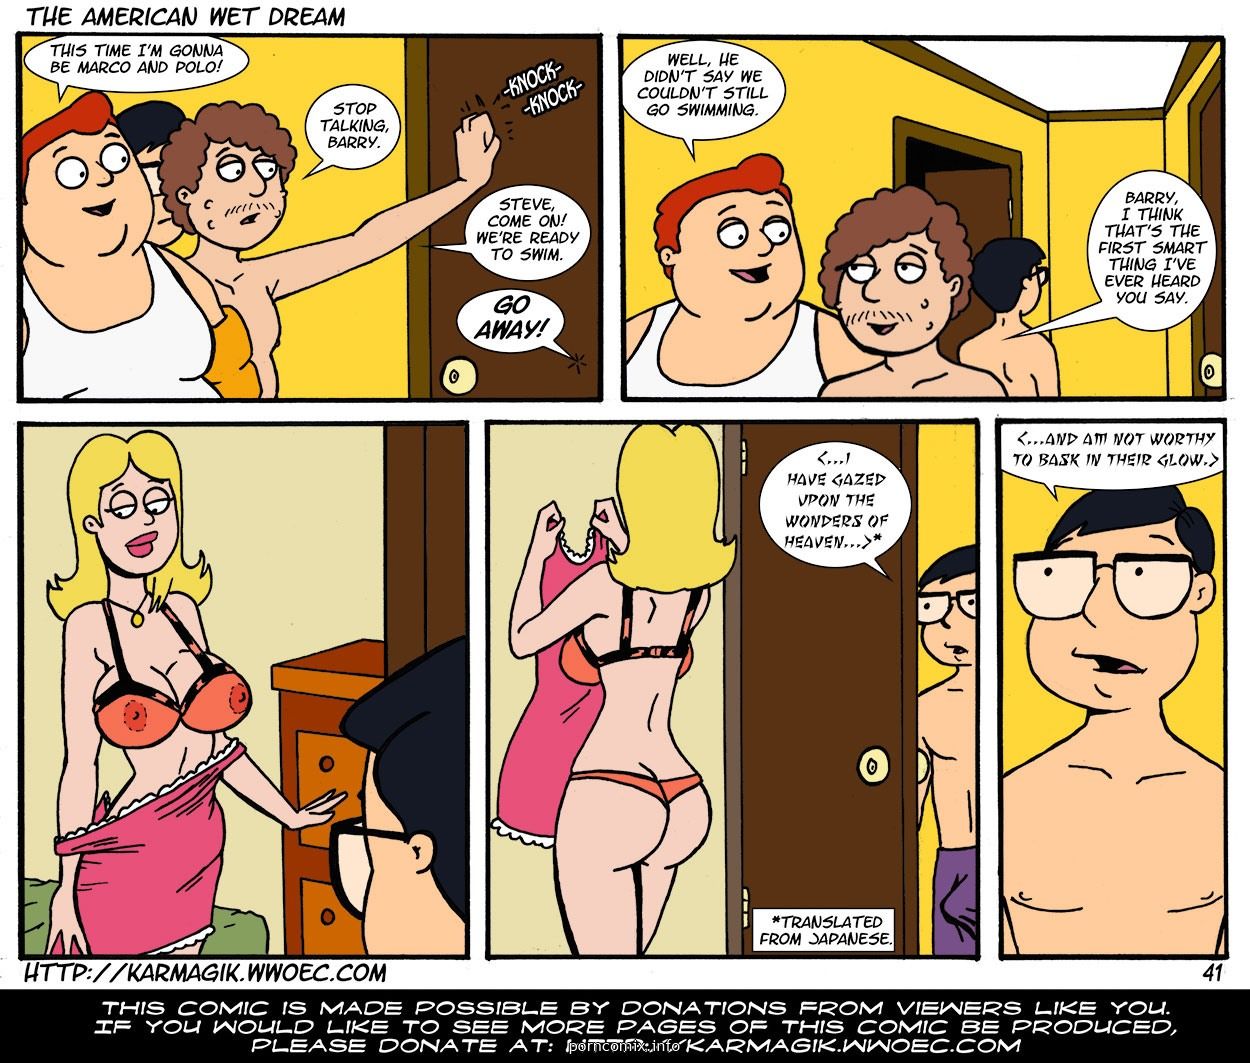 The American Wet Dream (American Dad) page 41